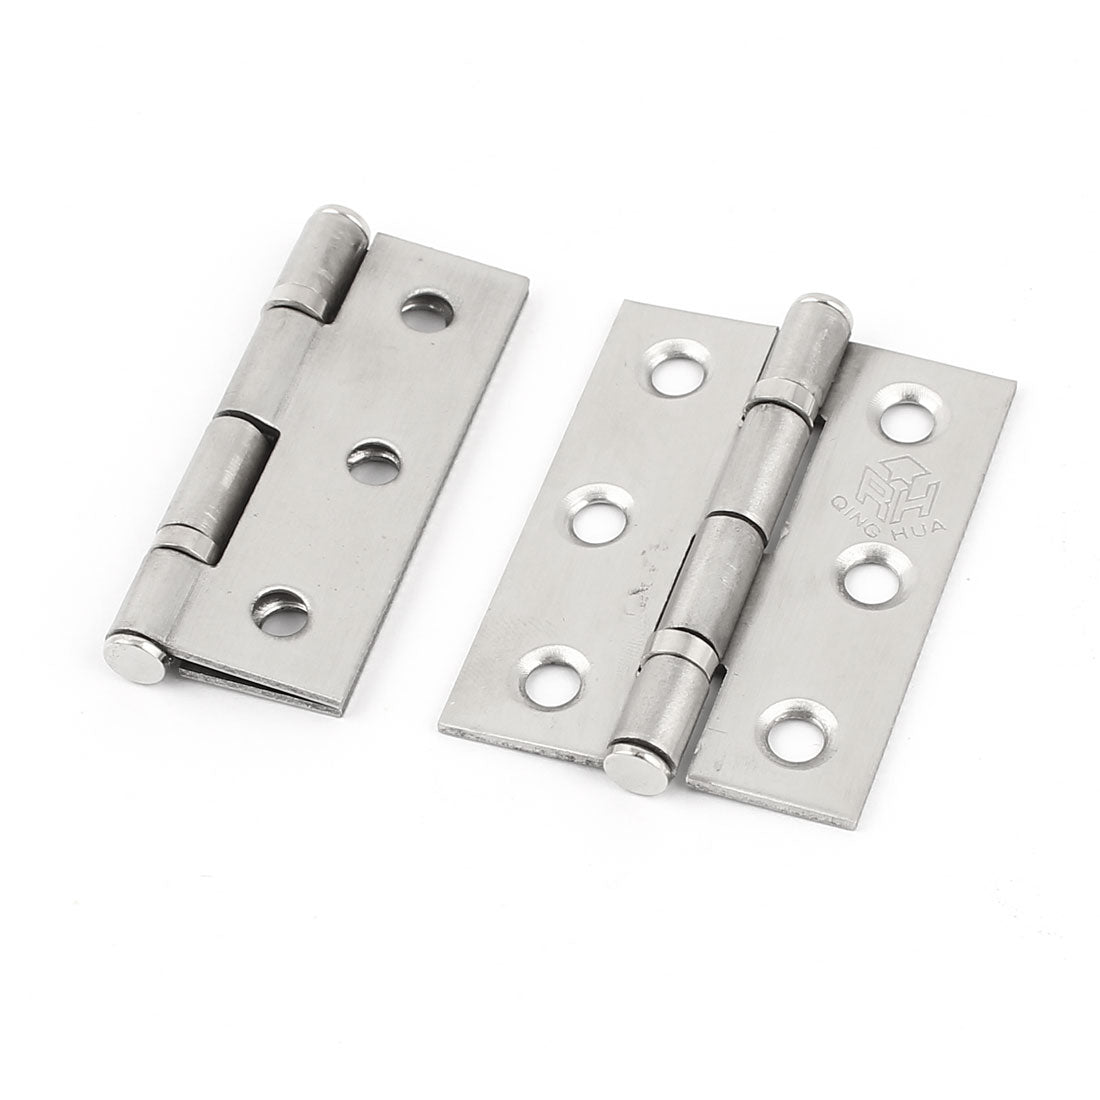 uxcell Uxcell 2 Pieces Hardware 50mm 2" Long Metal Hinge Silver Tone for Home Drawer Door